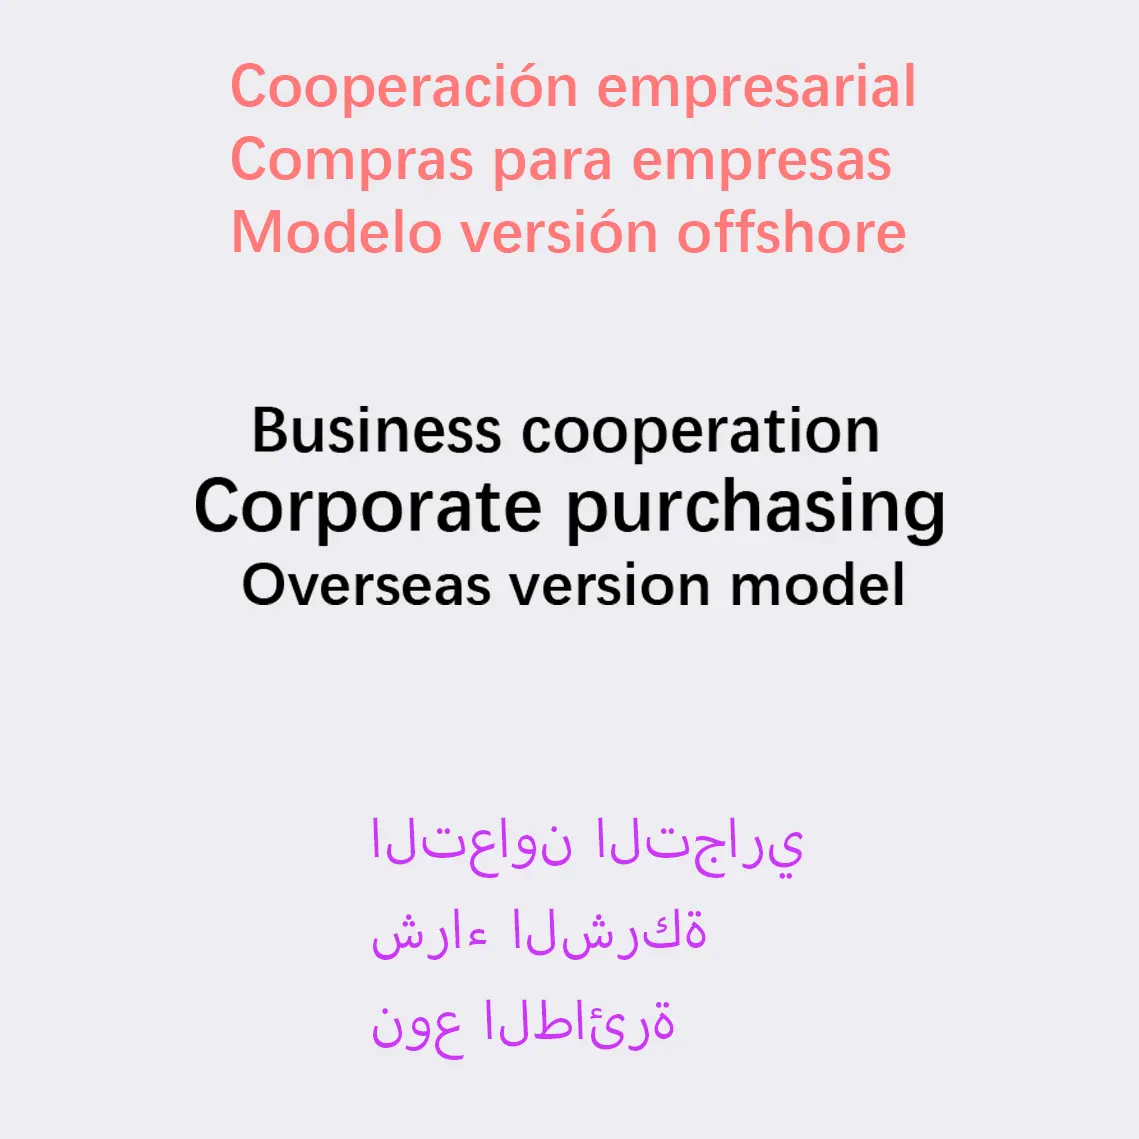 Business cooperation Corporate purchasing Overseas version model